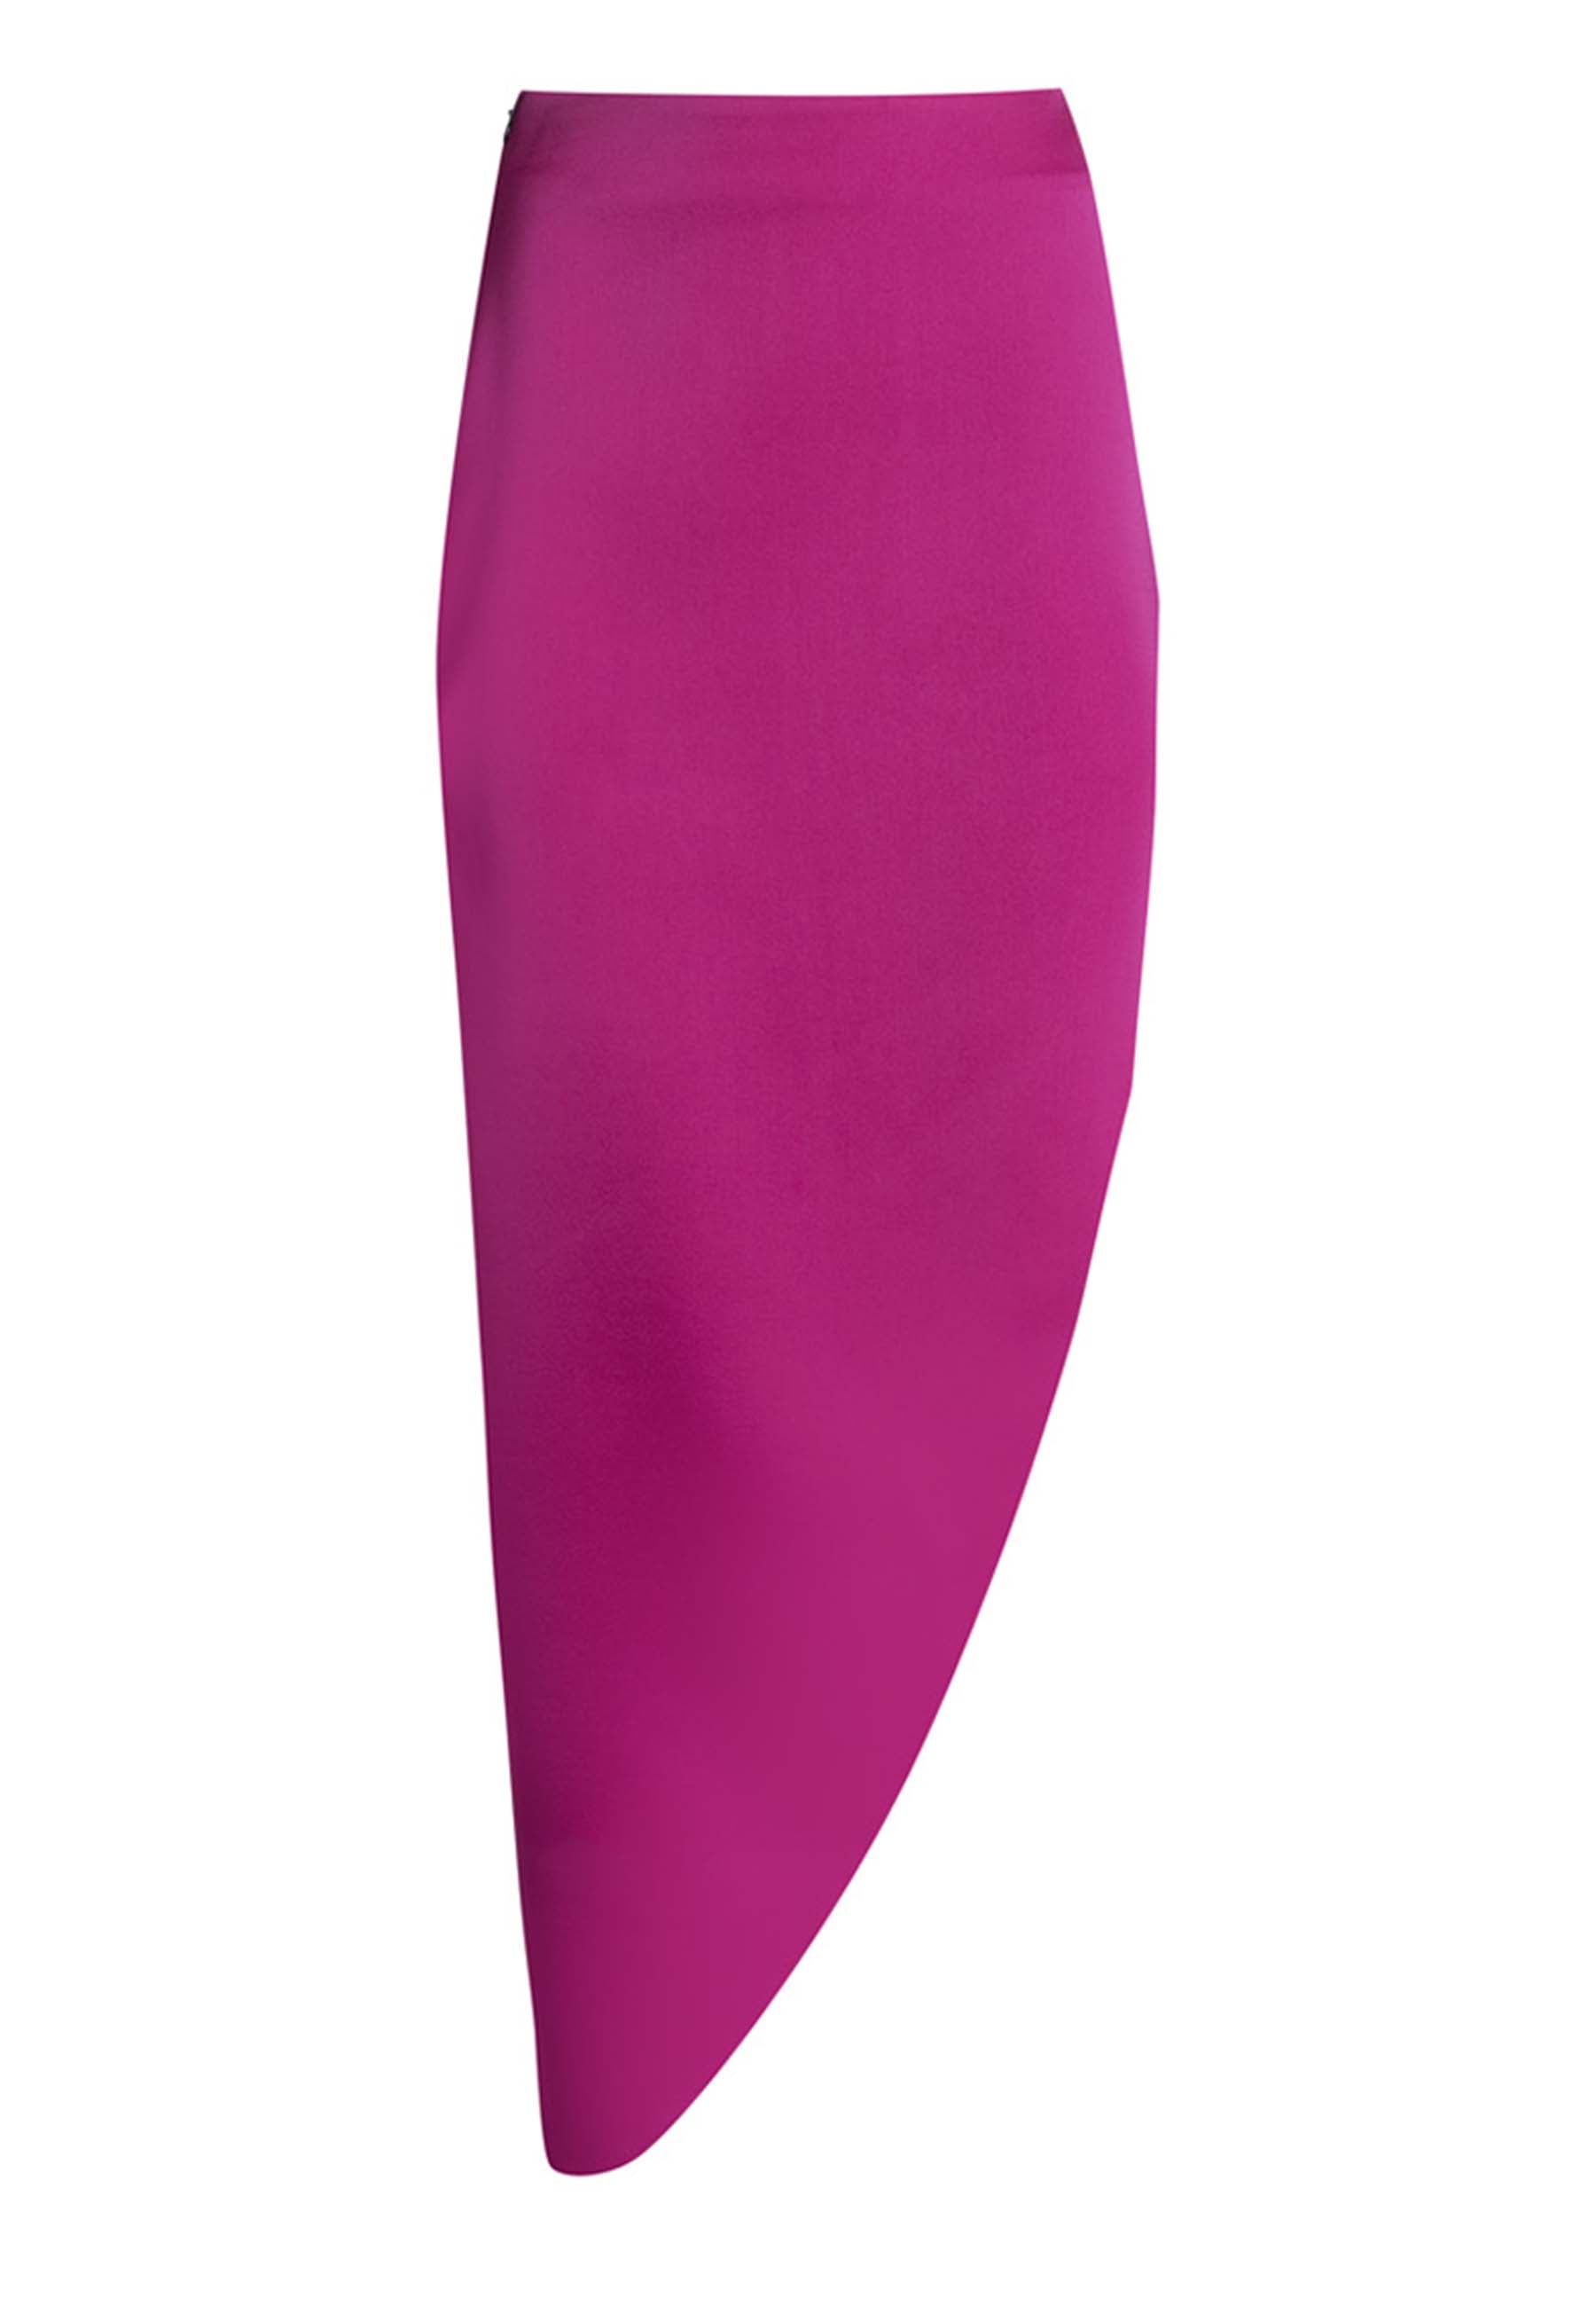 Women's midi skirt in fuchsia fabric with side tip and slit